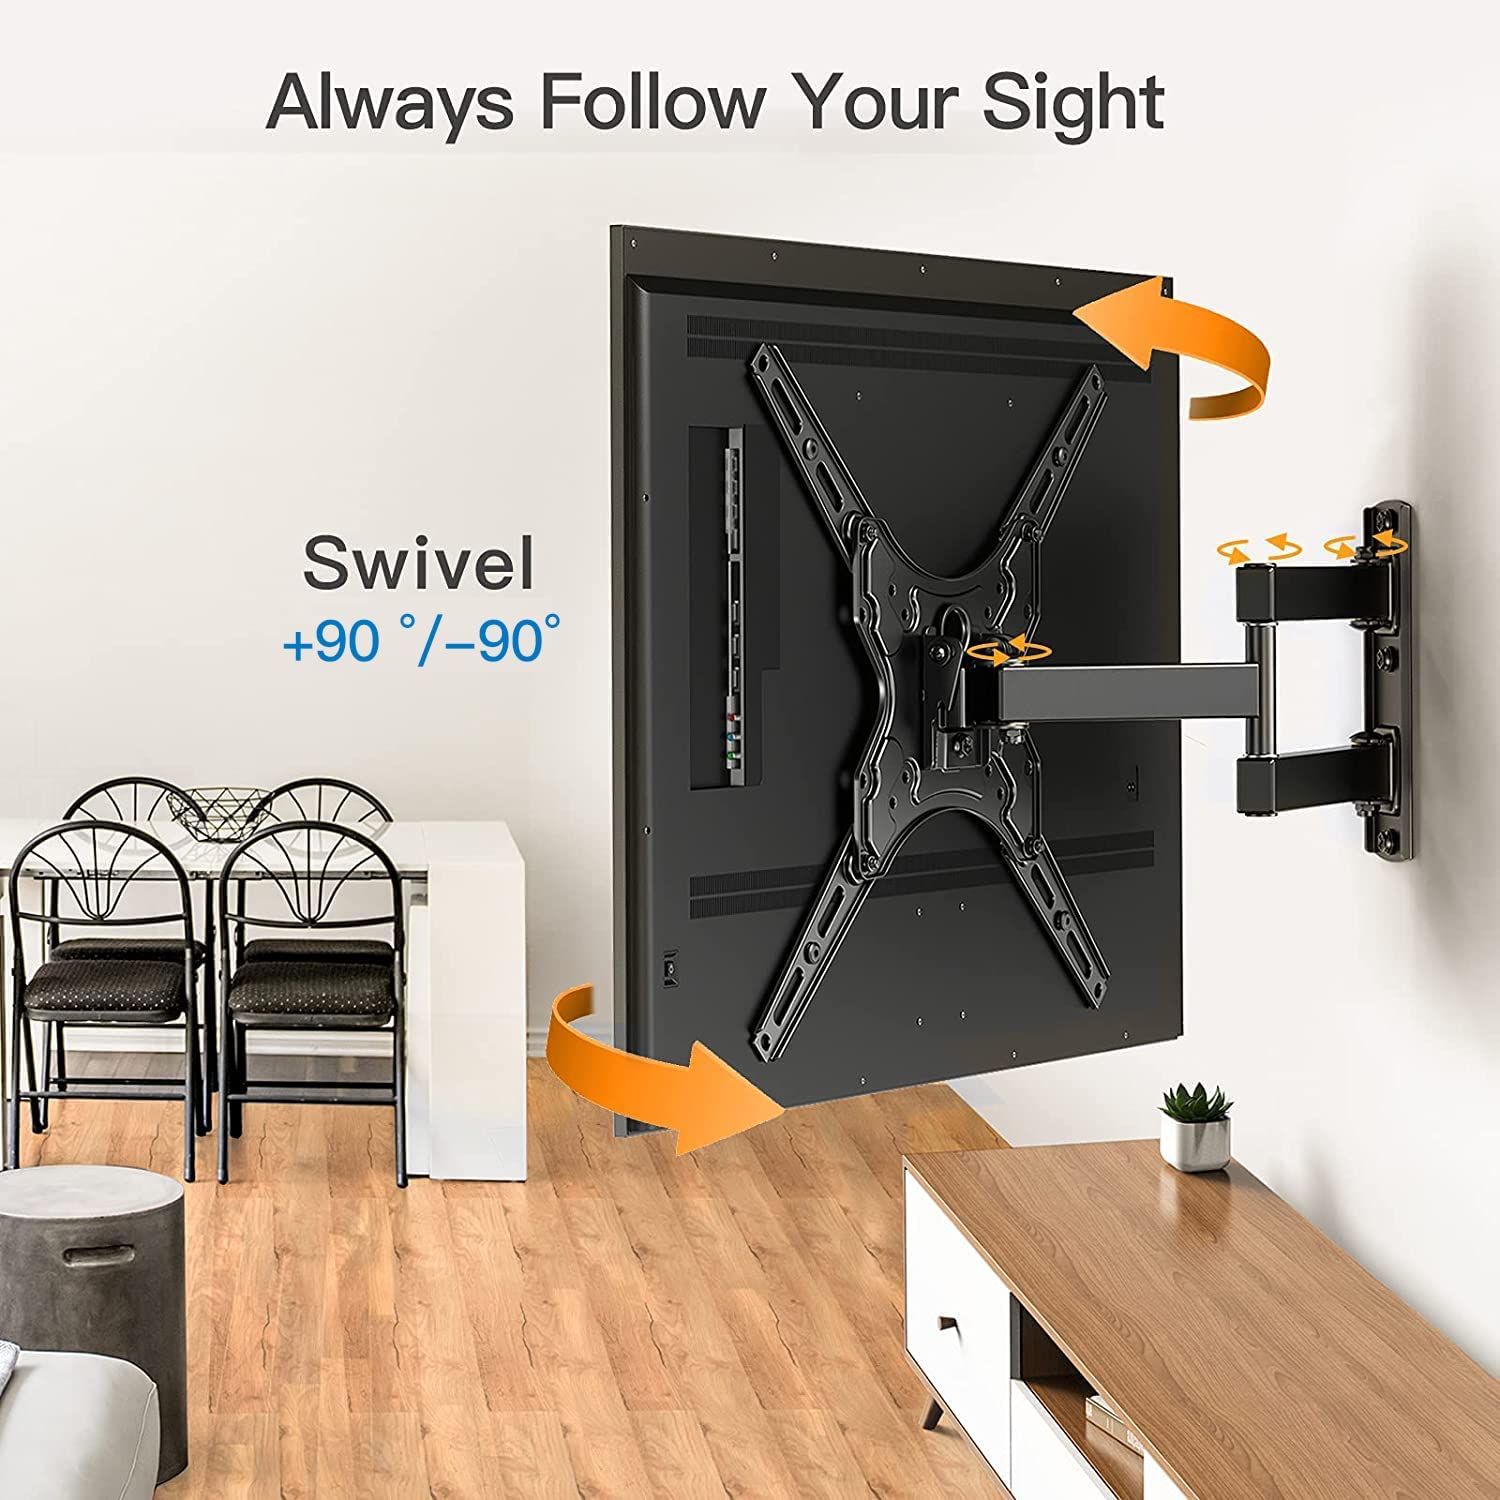 Full Motion TV Monitor Wall Mount For 26